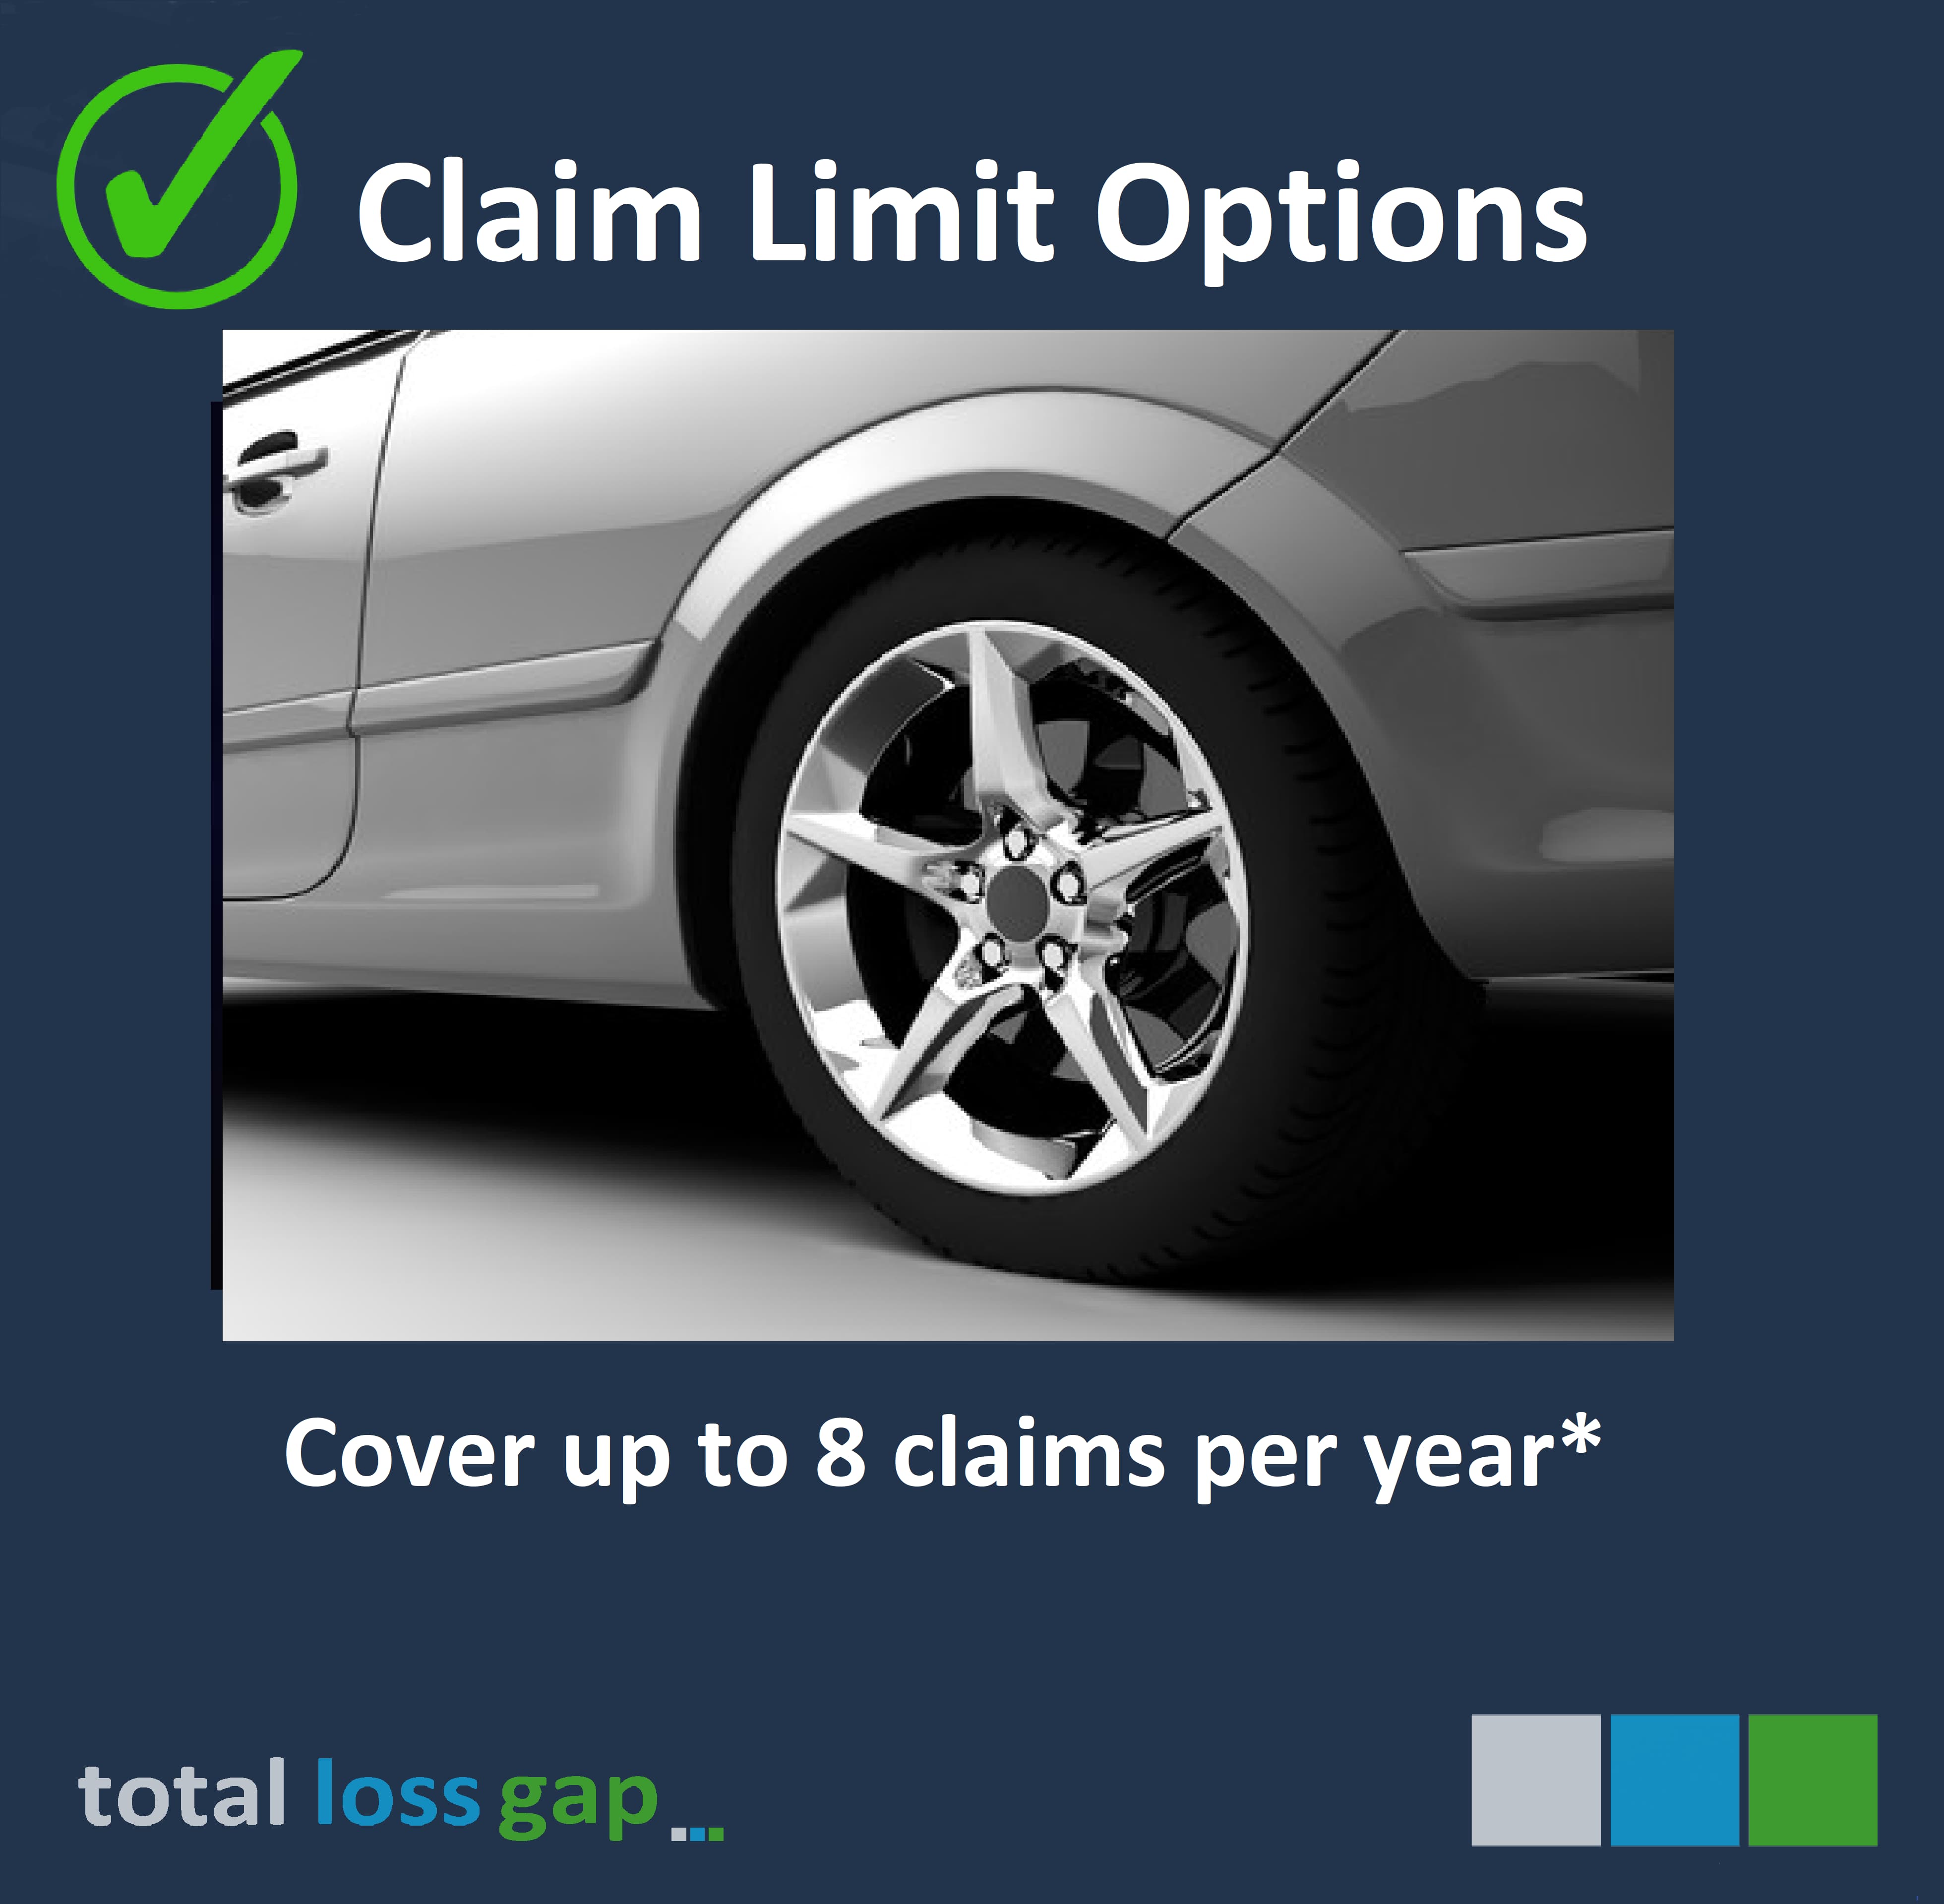 You can make up to 4 tyre and 4 allow wheel claims per year.